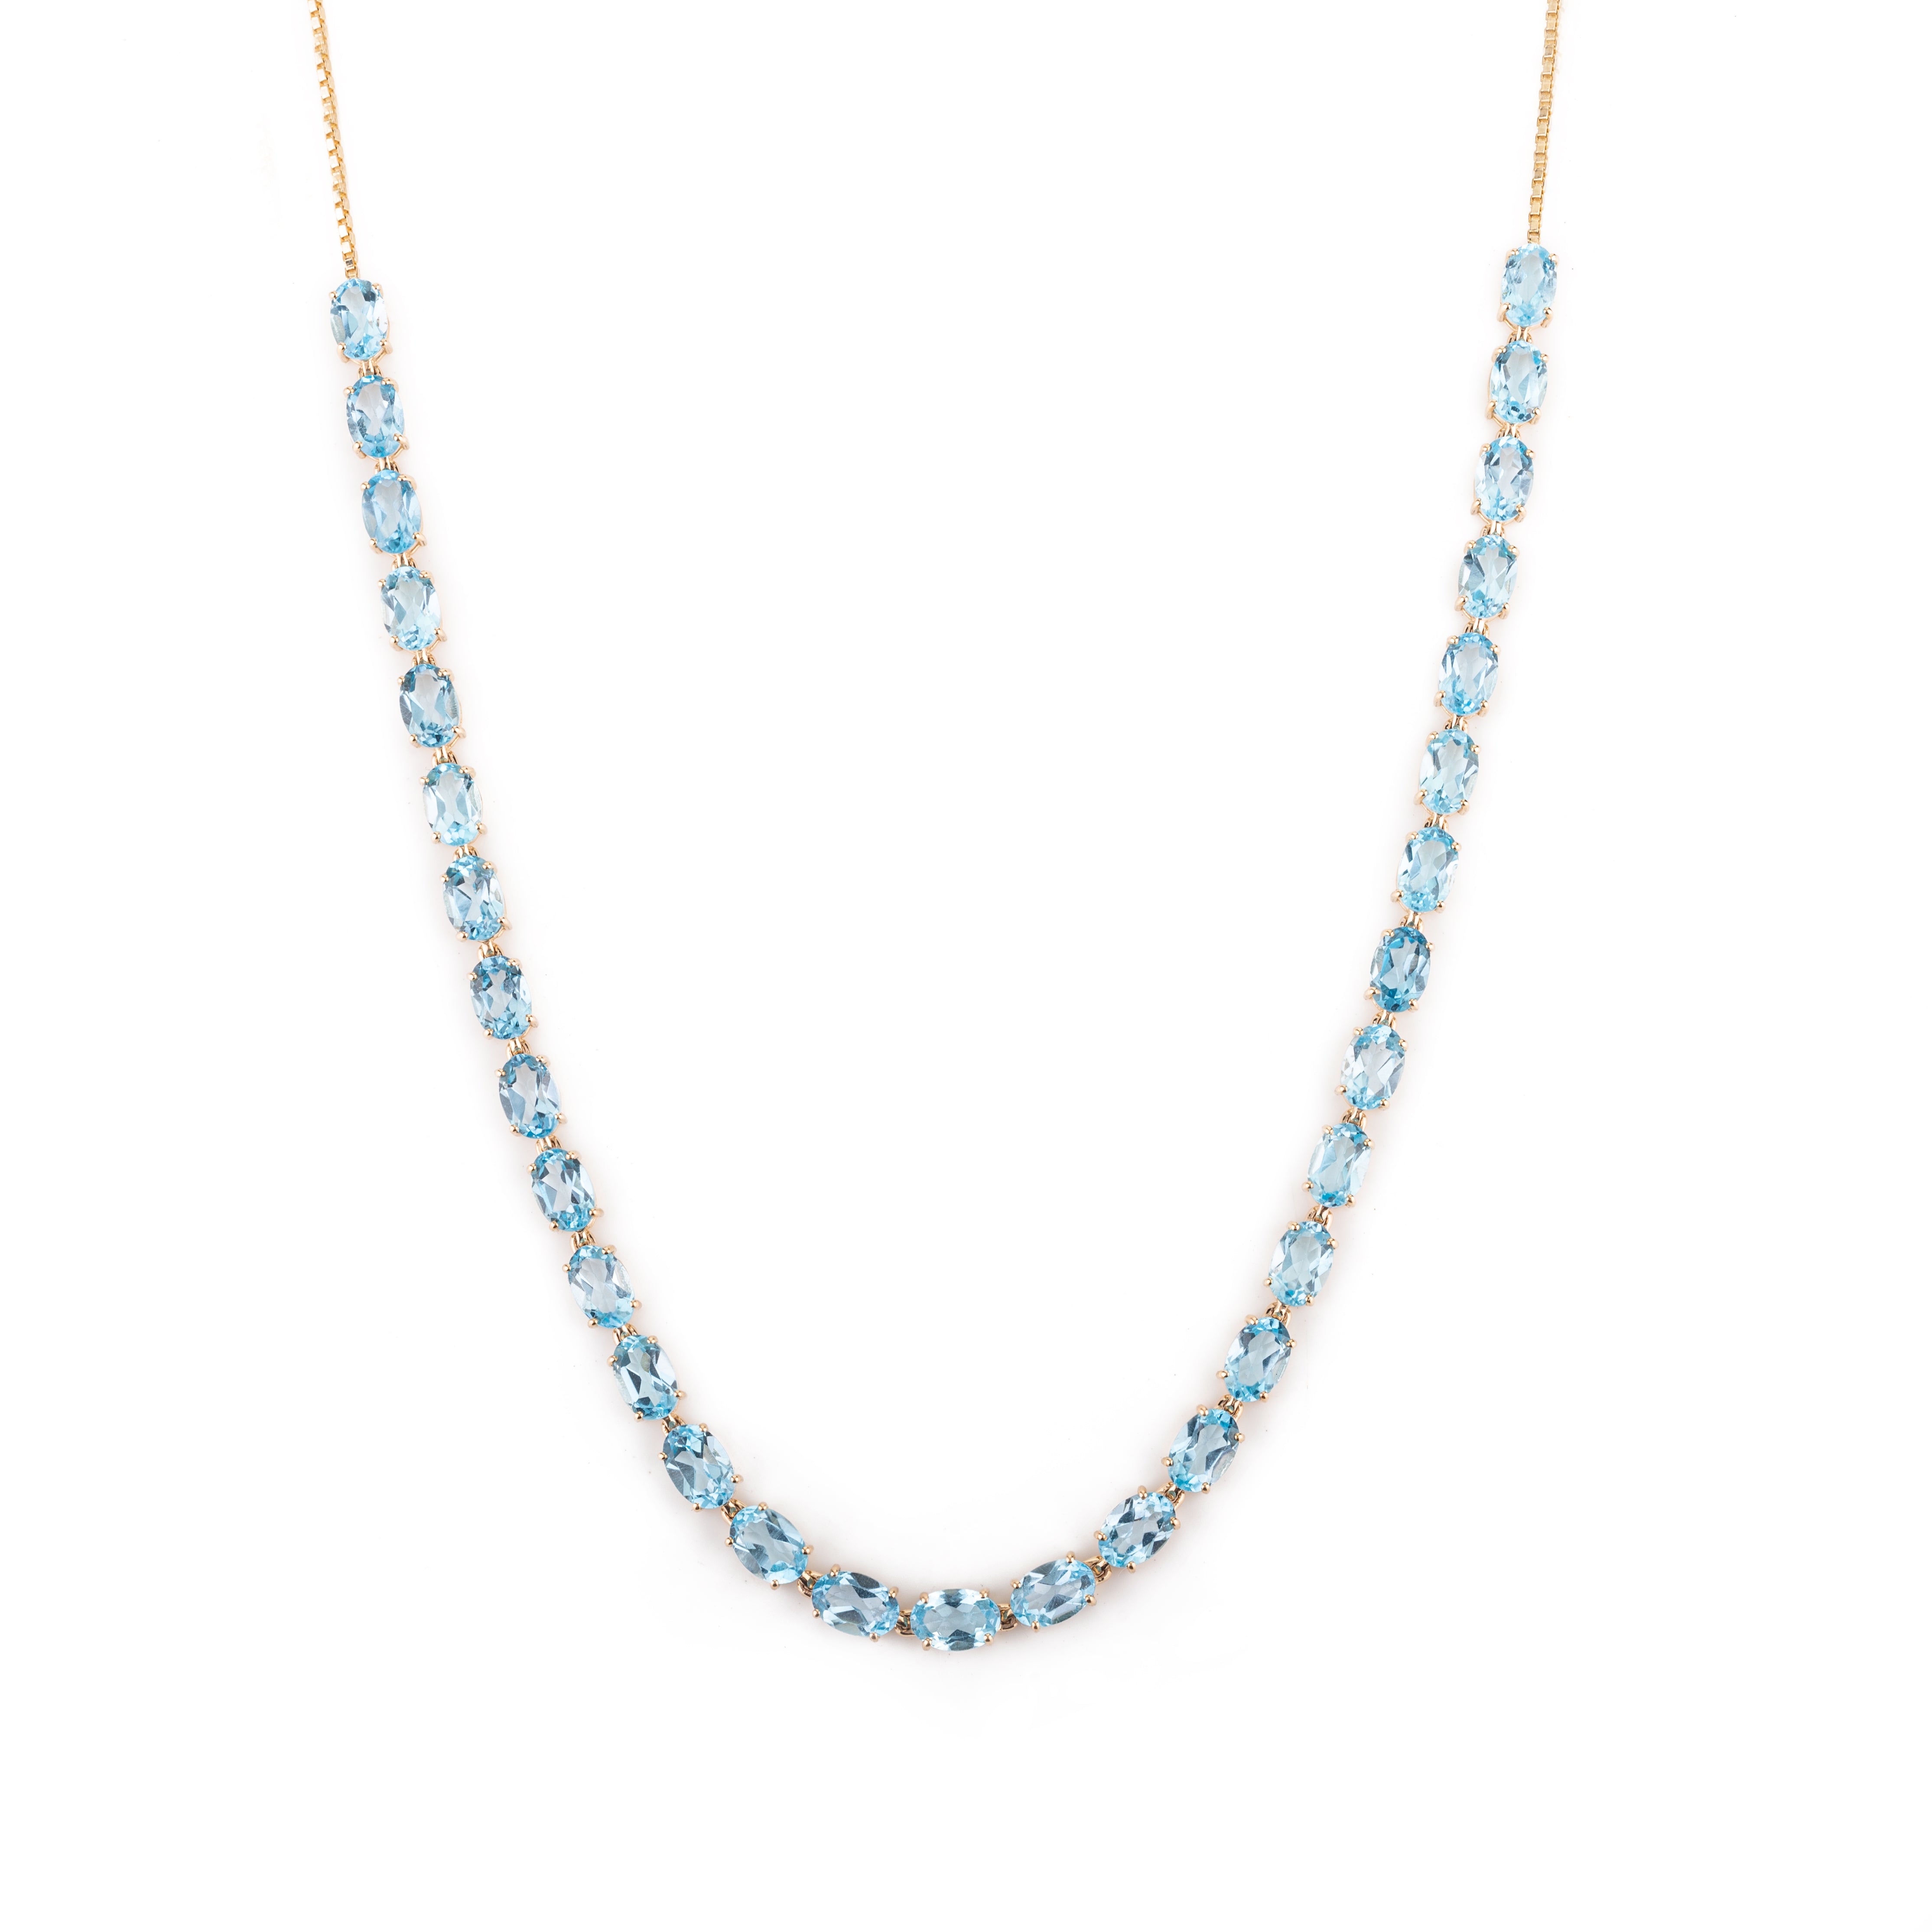 Natural Blue Topaz Gemstone Necklace and Earrings Set